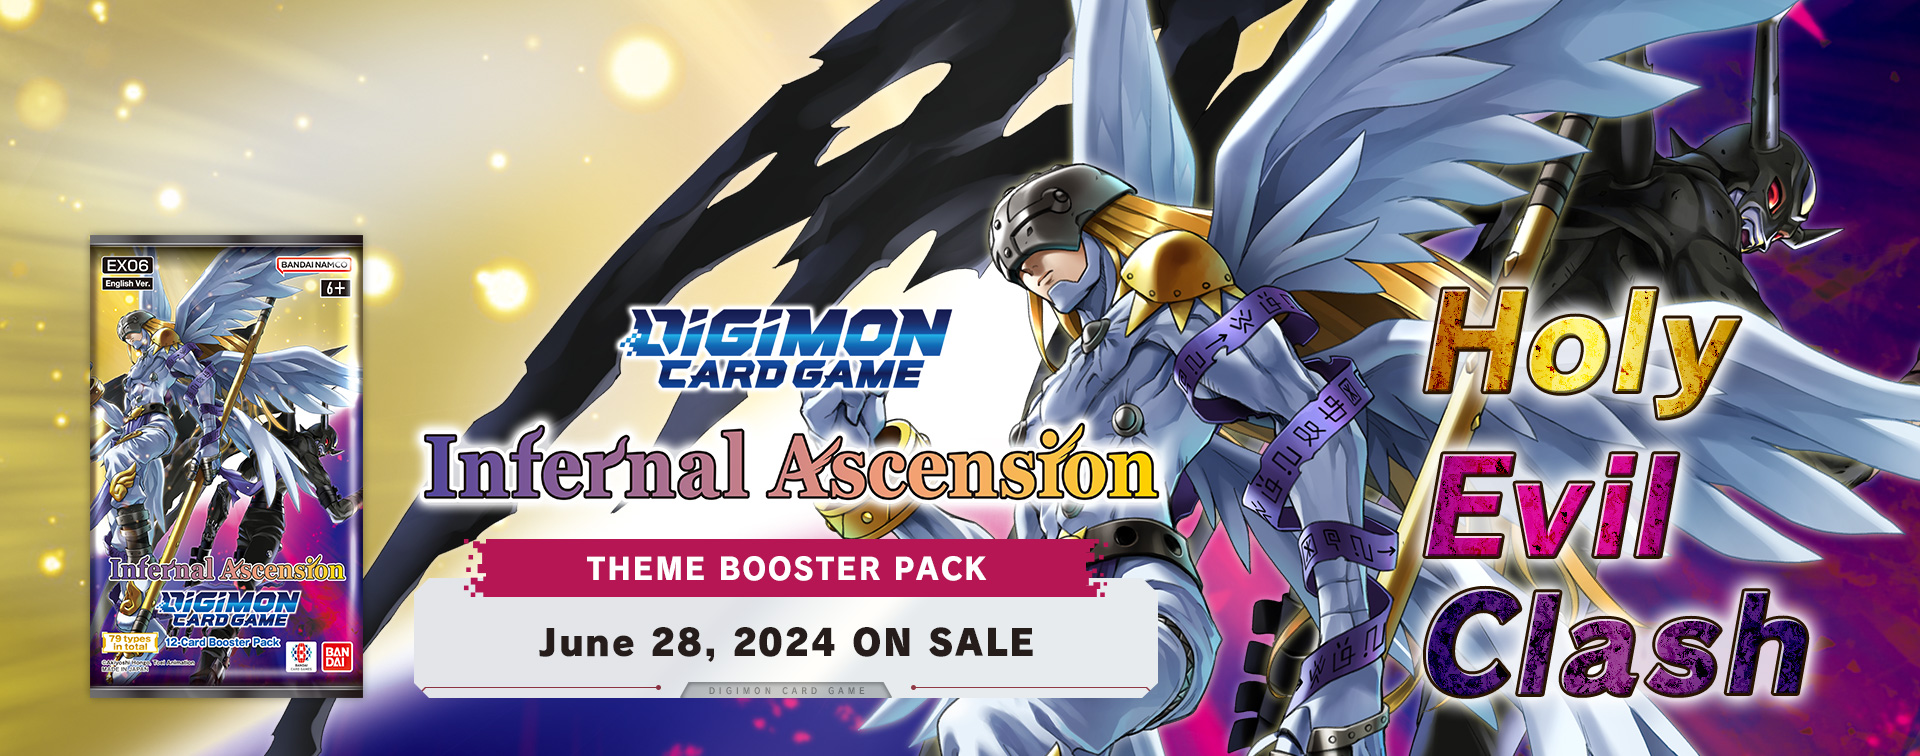 DIGIMON CARD GAME THEME BOOSTER INFERNAL ASCENSION [EX-06]